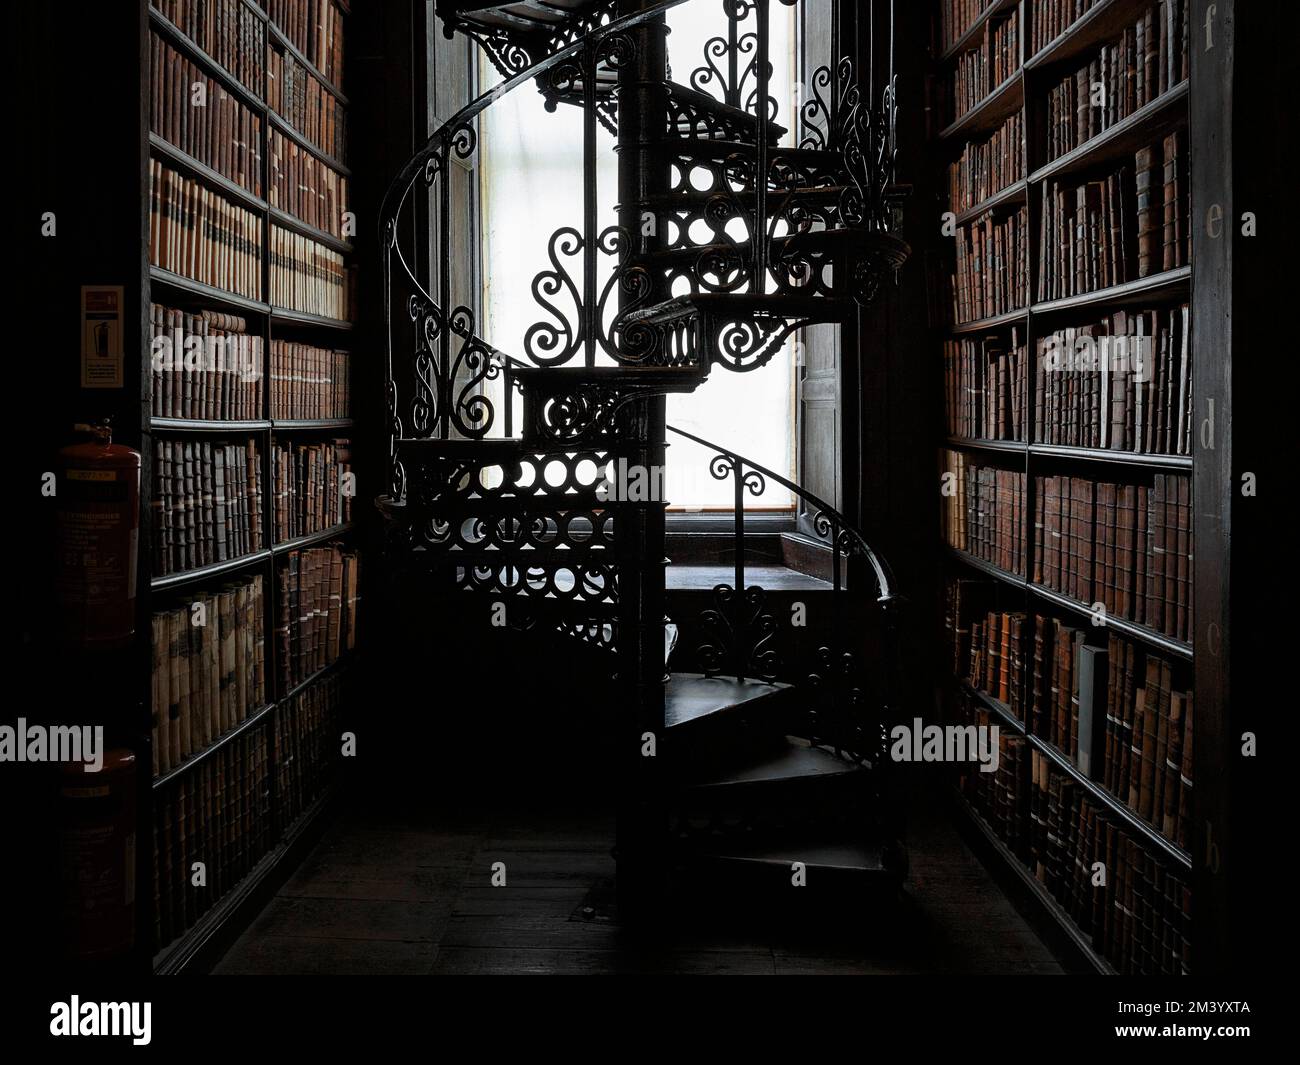 Spiral staircase and bookshelves, old 18th century library, detail, backlight, Long Room, Trinity College, University of Dublin, Ireland Stock Photo